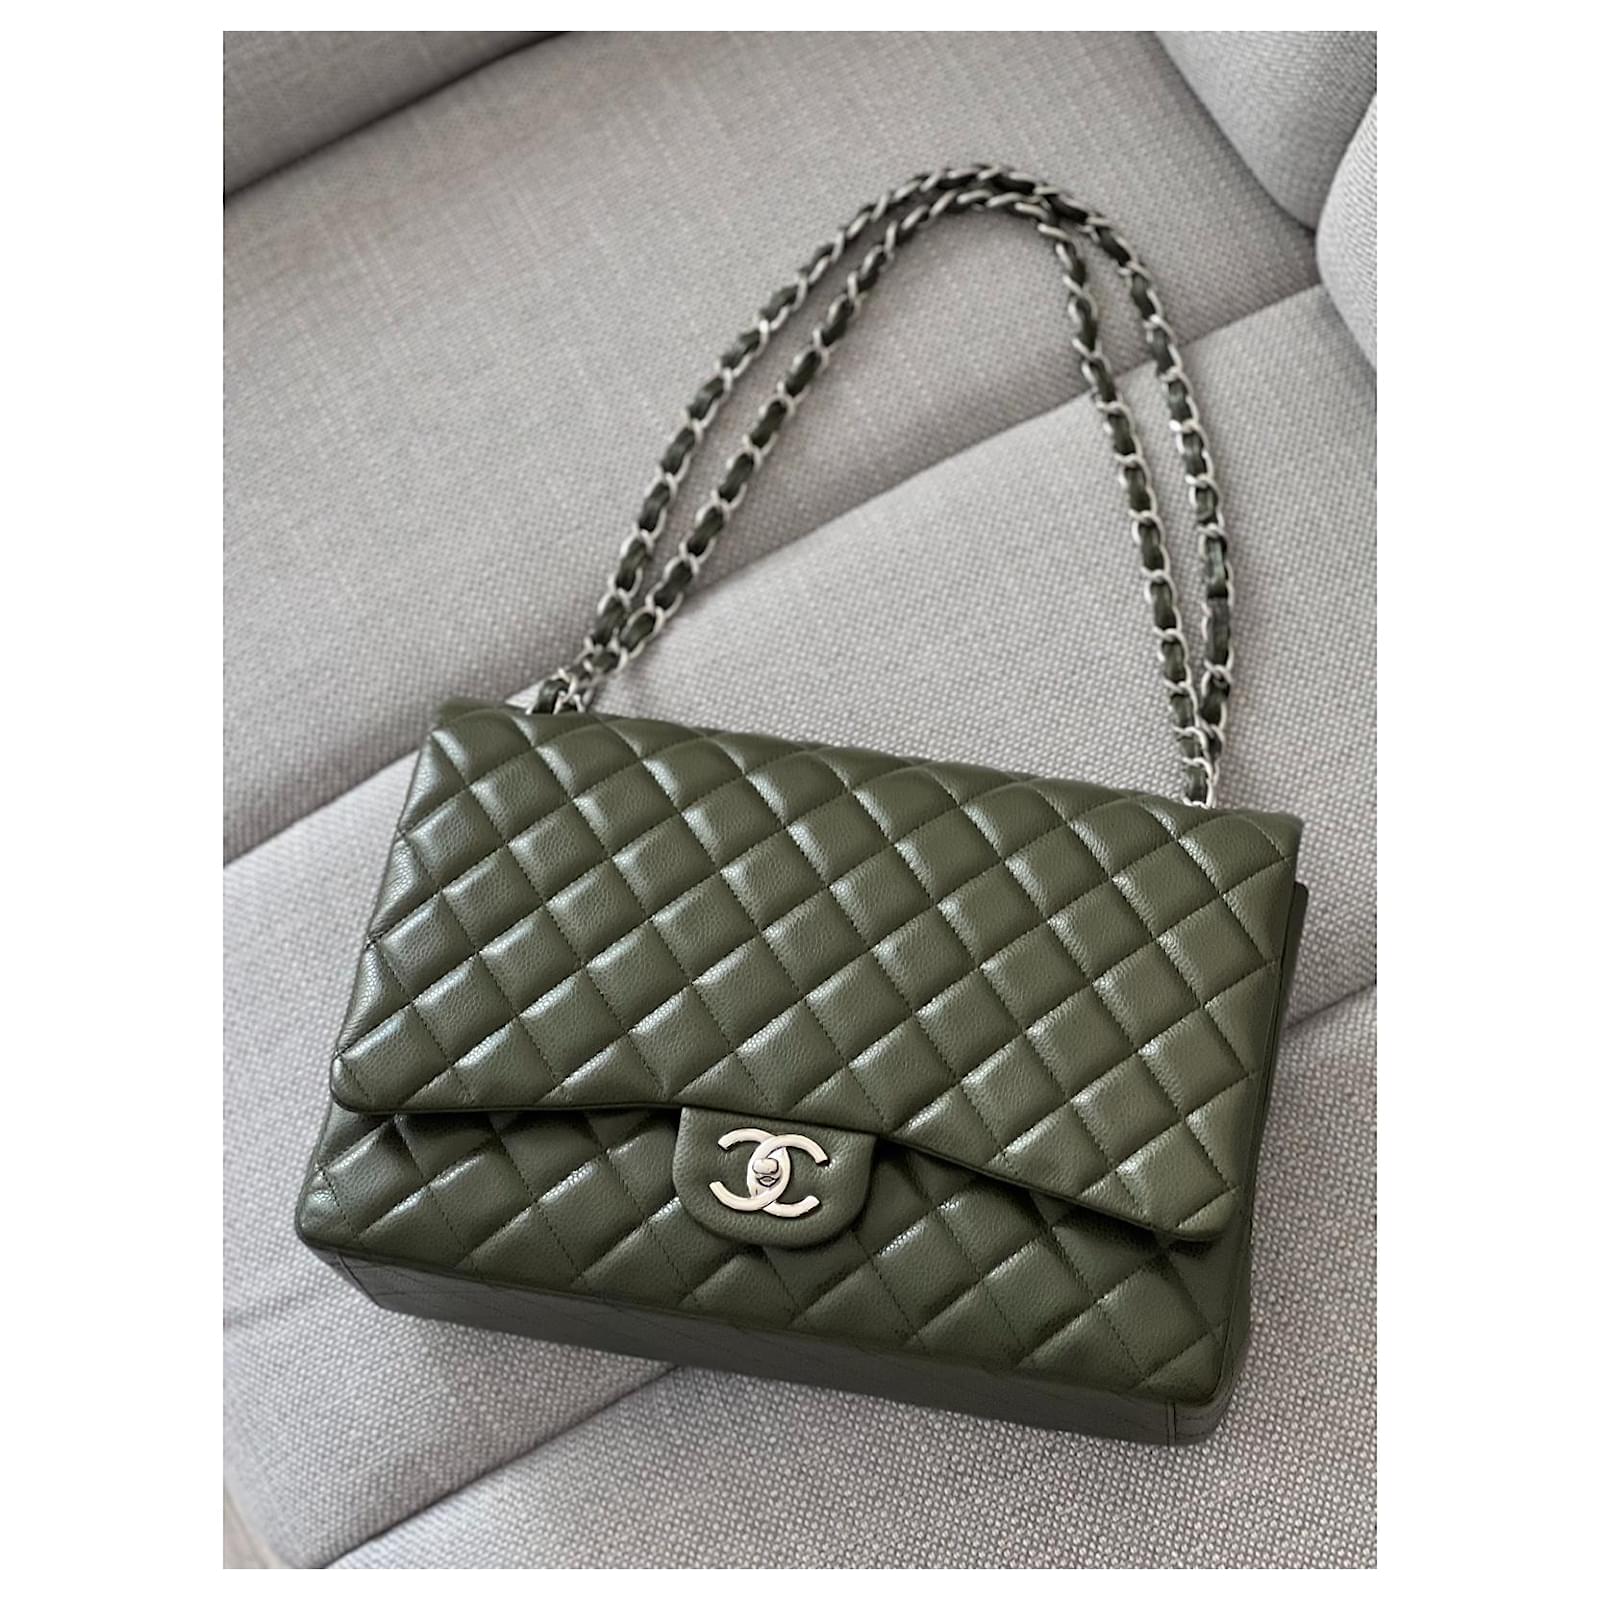 Chanel Classic flap maxi bag in black patent SHW  DOWNTOWN UPTOWN Genève